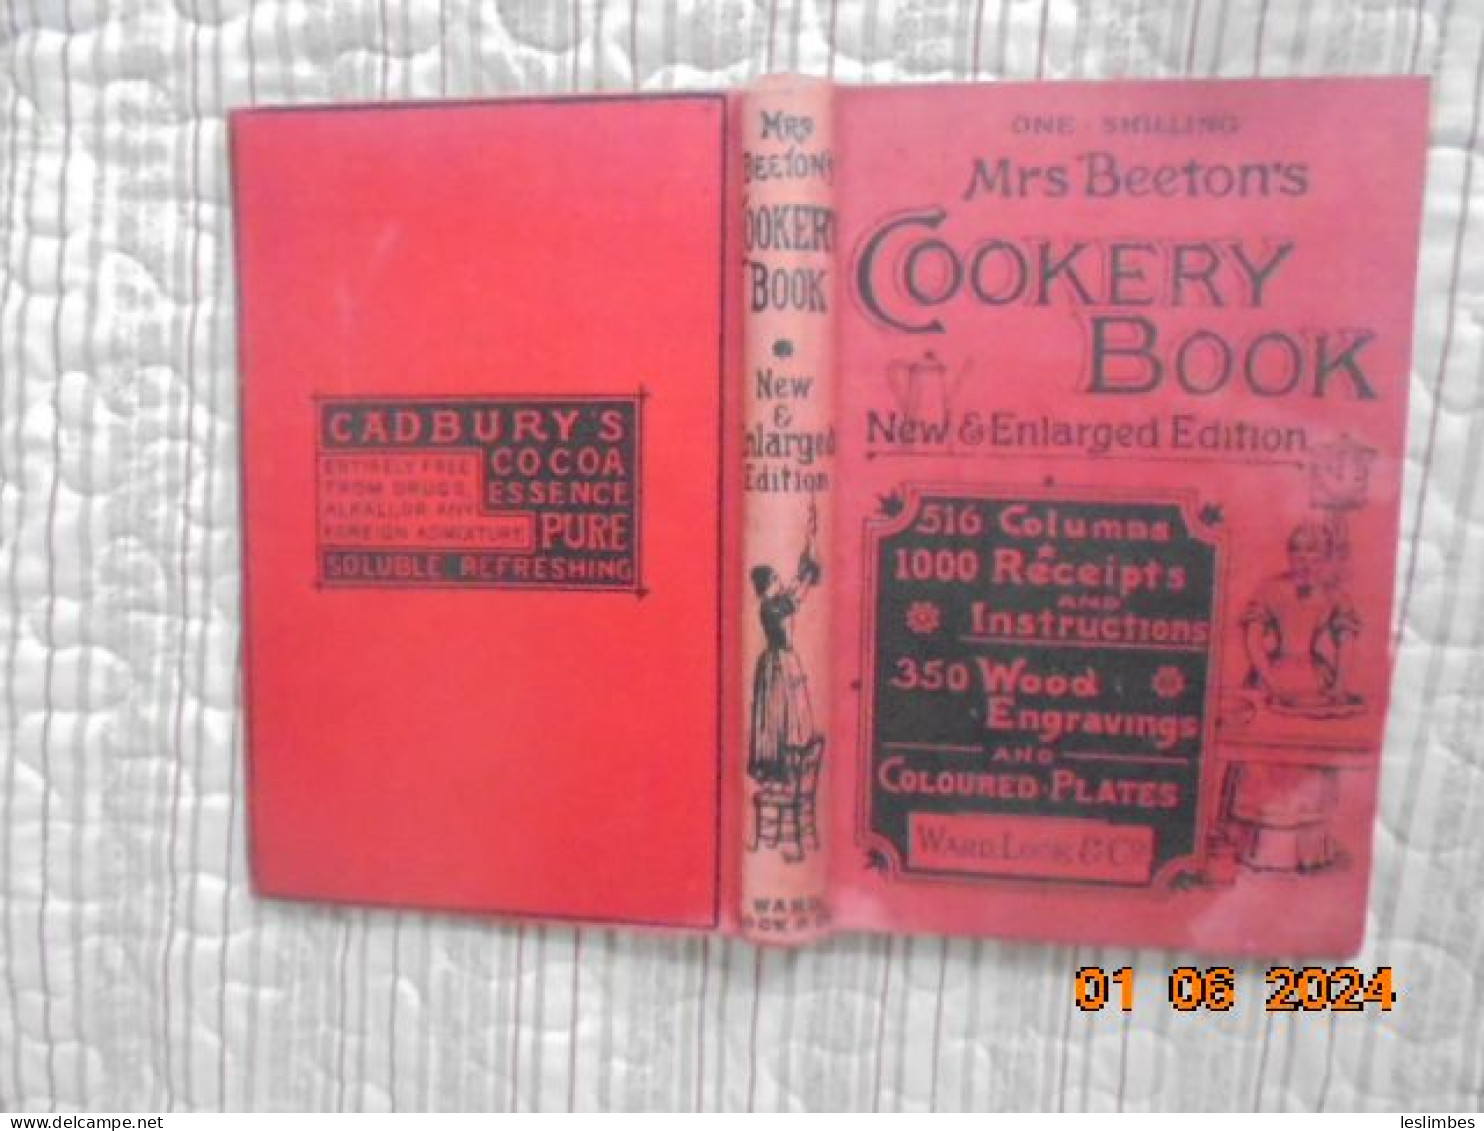 Mrs Beeton's Cookery Book And Household Guide. 1898 New & Enlarged Edition. 516 Columns, 1000 Receipts And Instructions - Basic, General Cooking